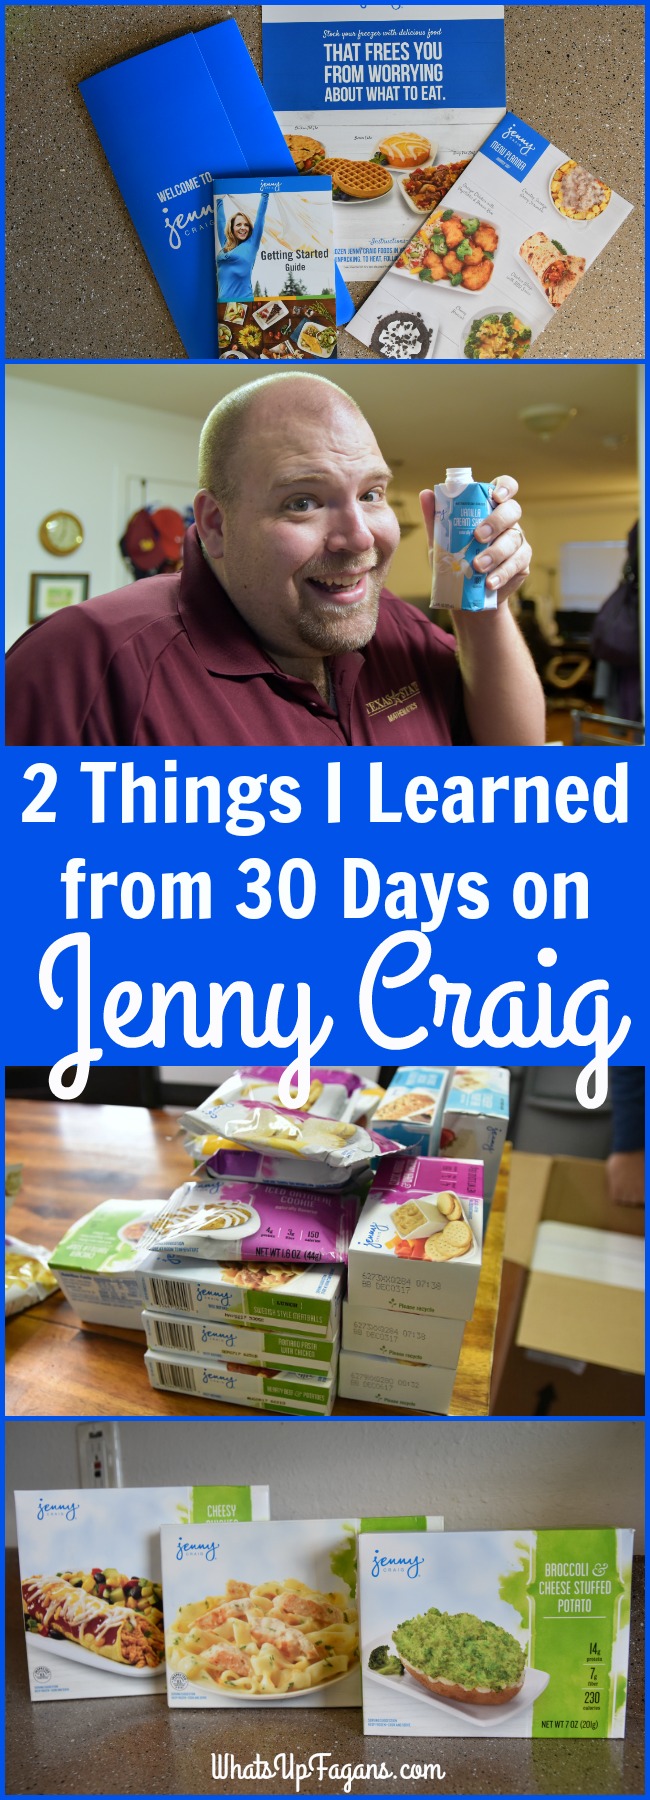 Jenny Craig Program | Weight Loss | Dieting | Diet | Portioned Food | Meals and Snacks Delivery 